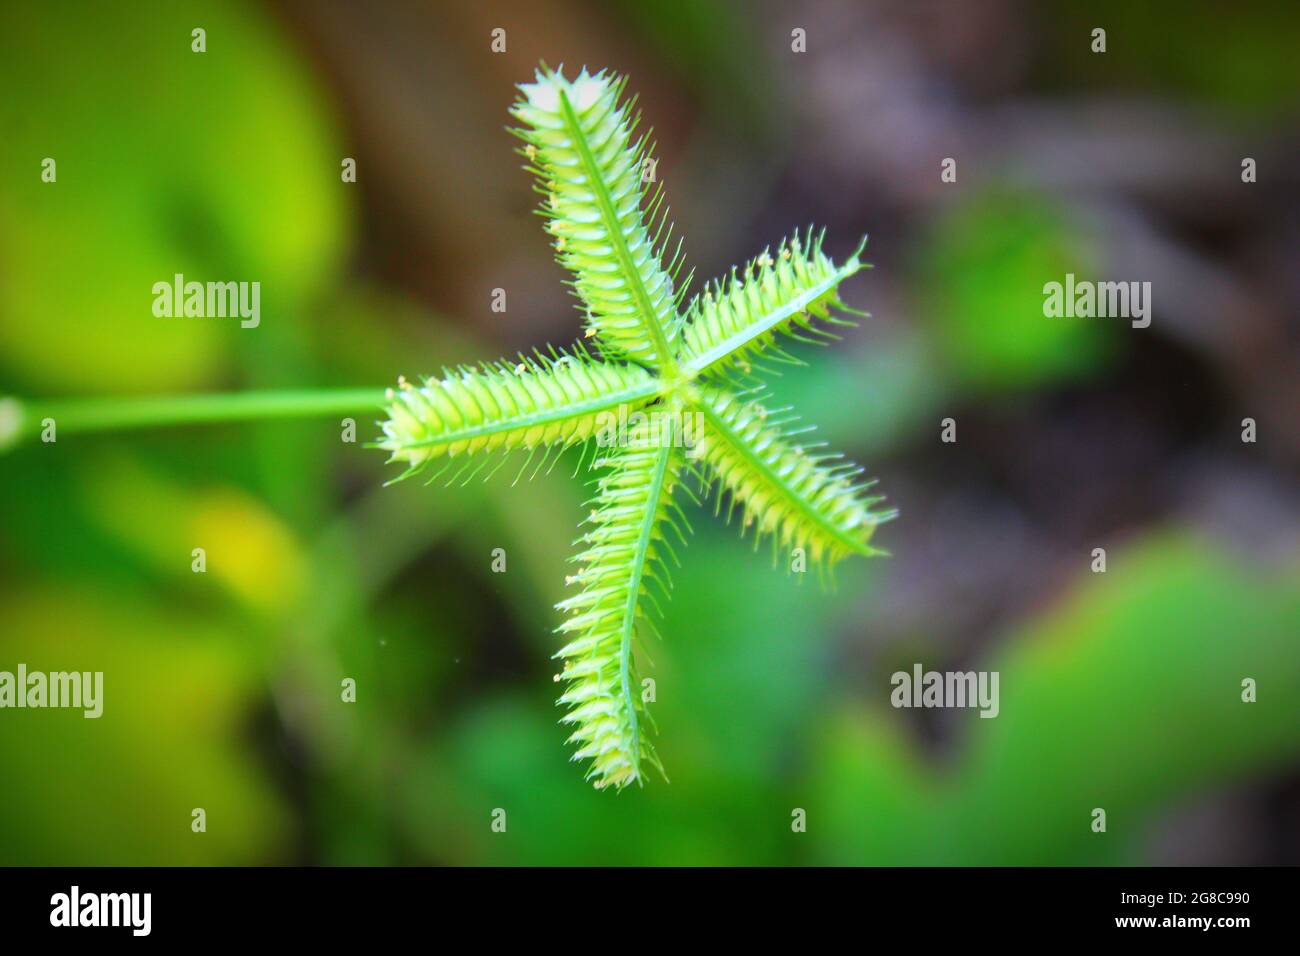 Closeup shot of Egyptian crowfoot grass on a blurred background Stock Photo